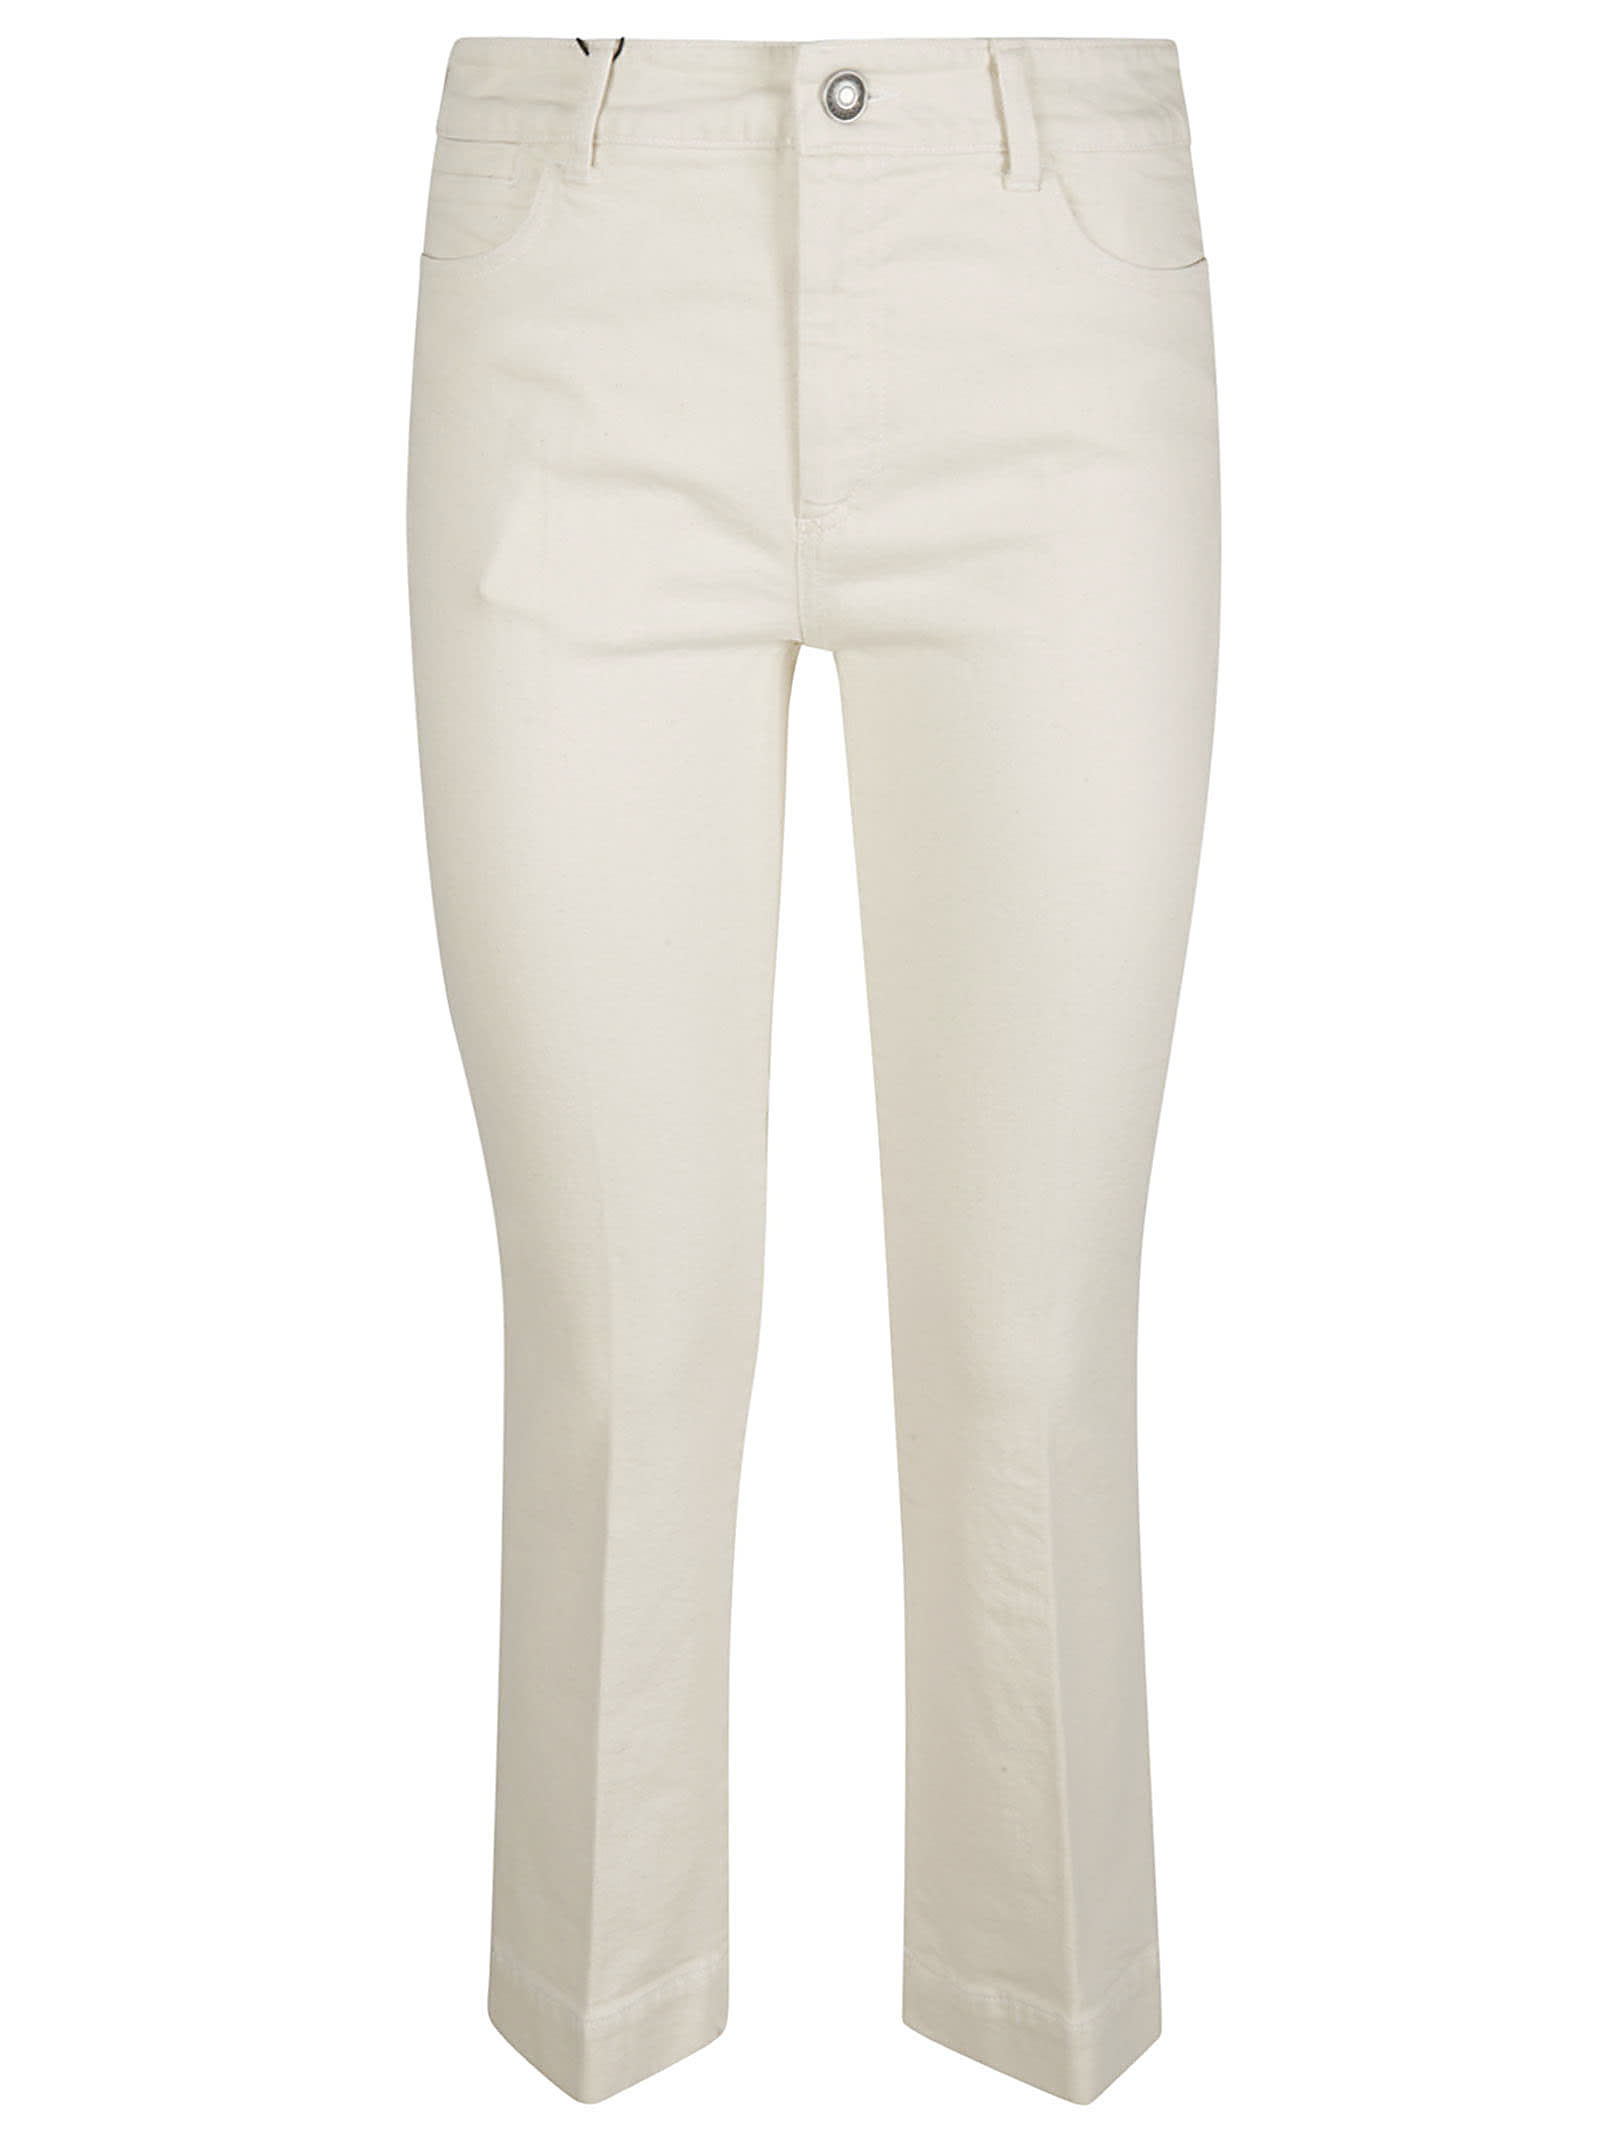 SportMax Orme Trousers